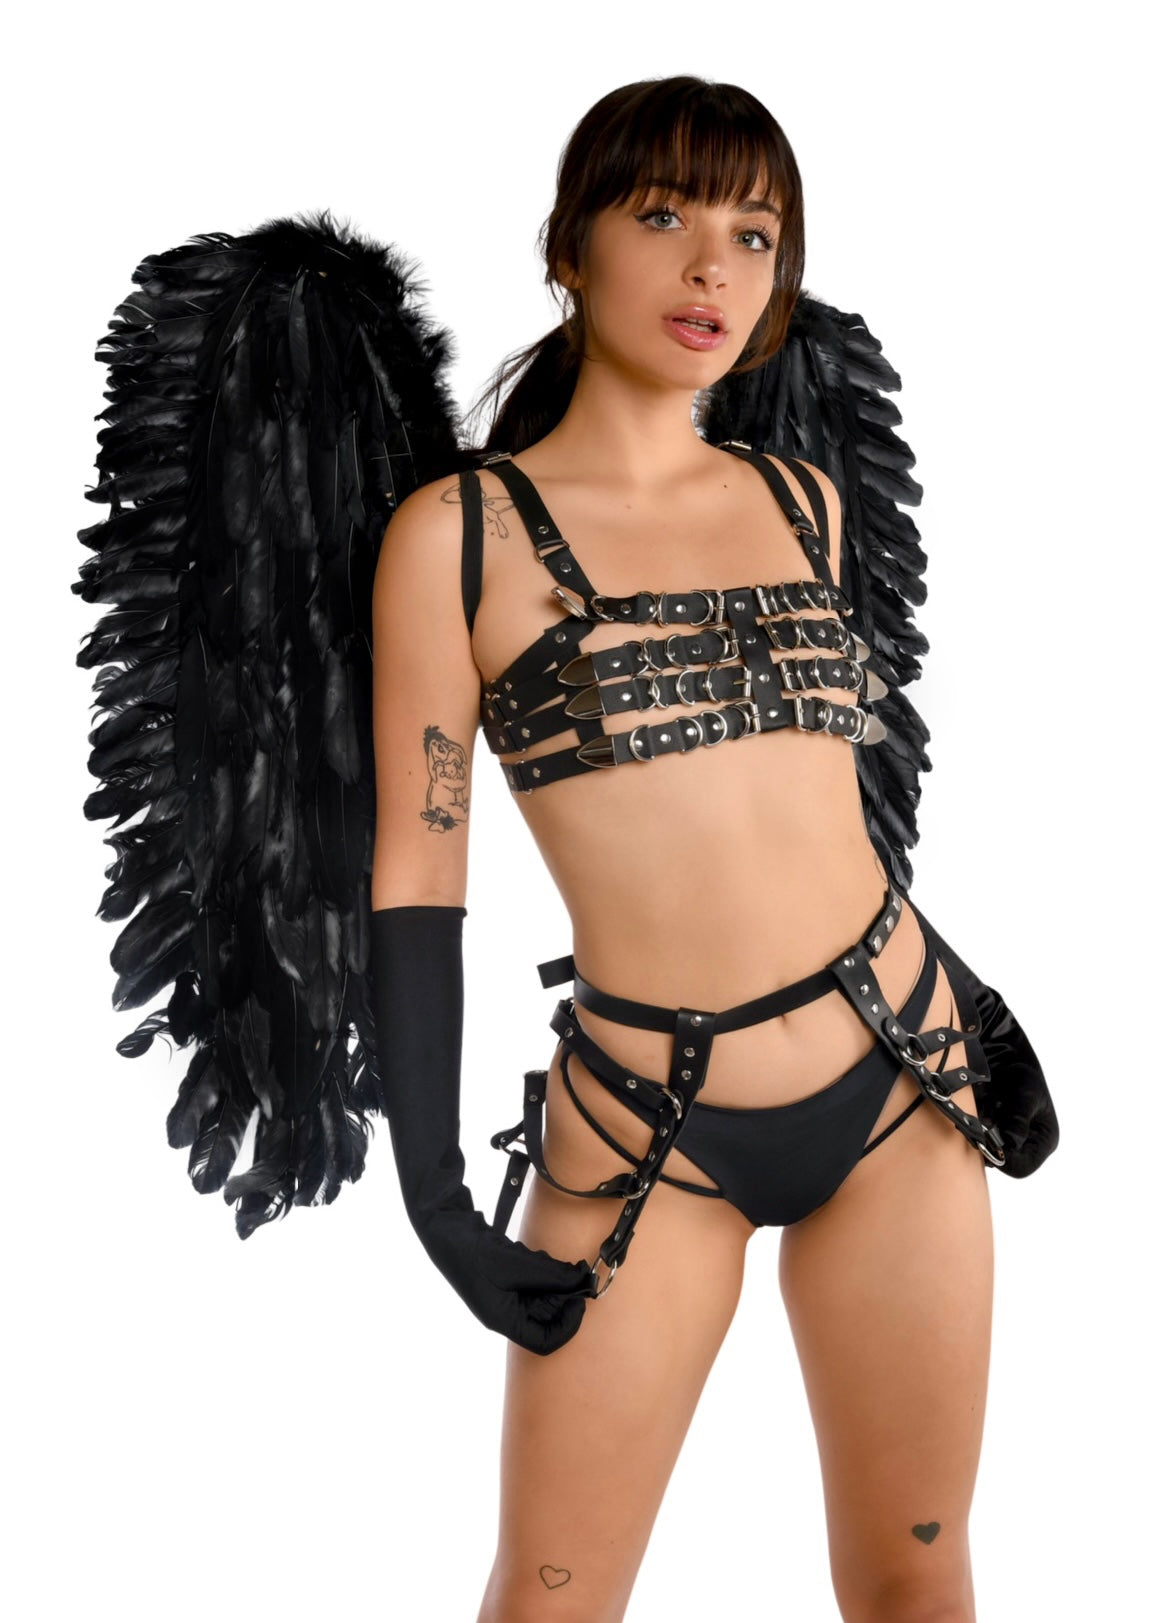 FULL OUTFIT- Angel Of Darkness